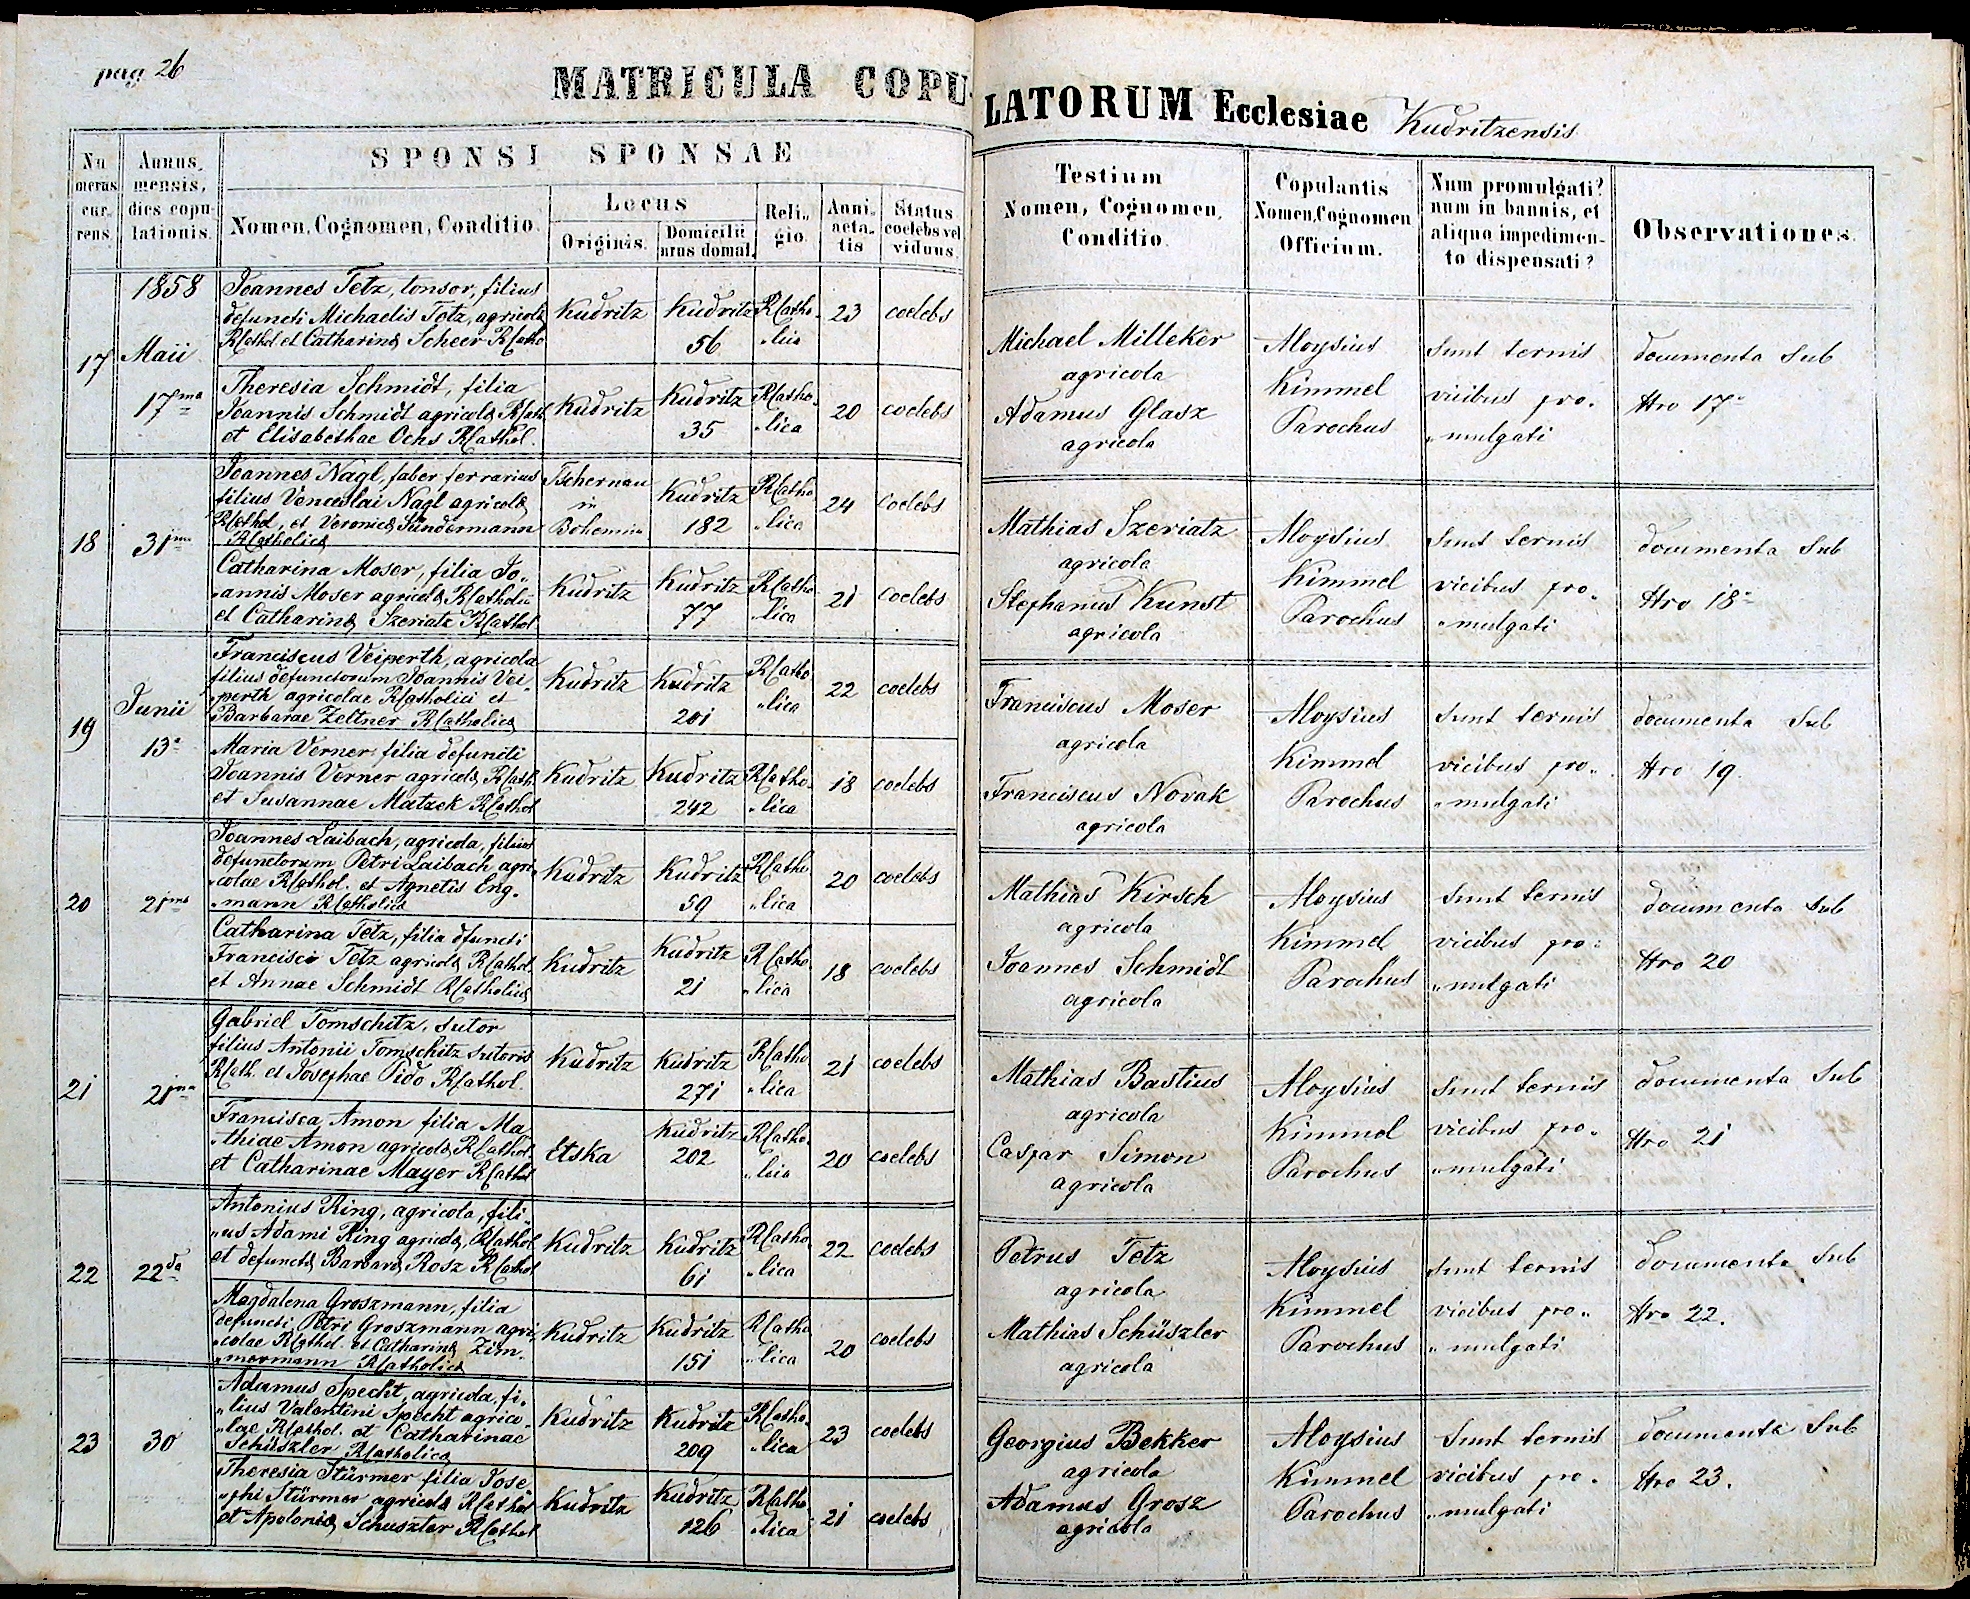 images/church_records/MARRIAGES/1852-1871M/026